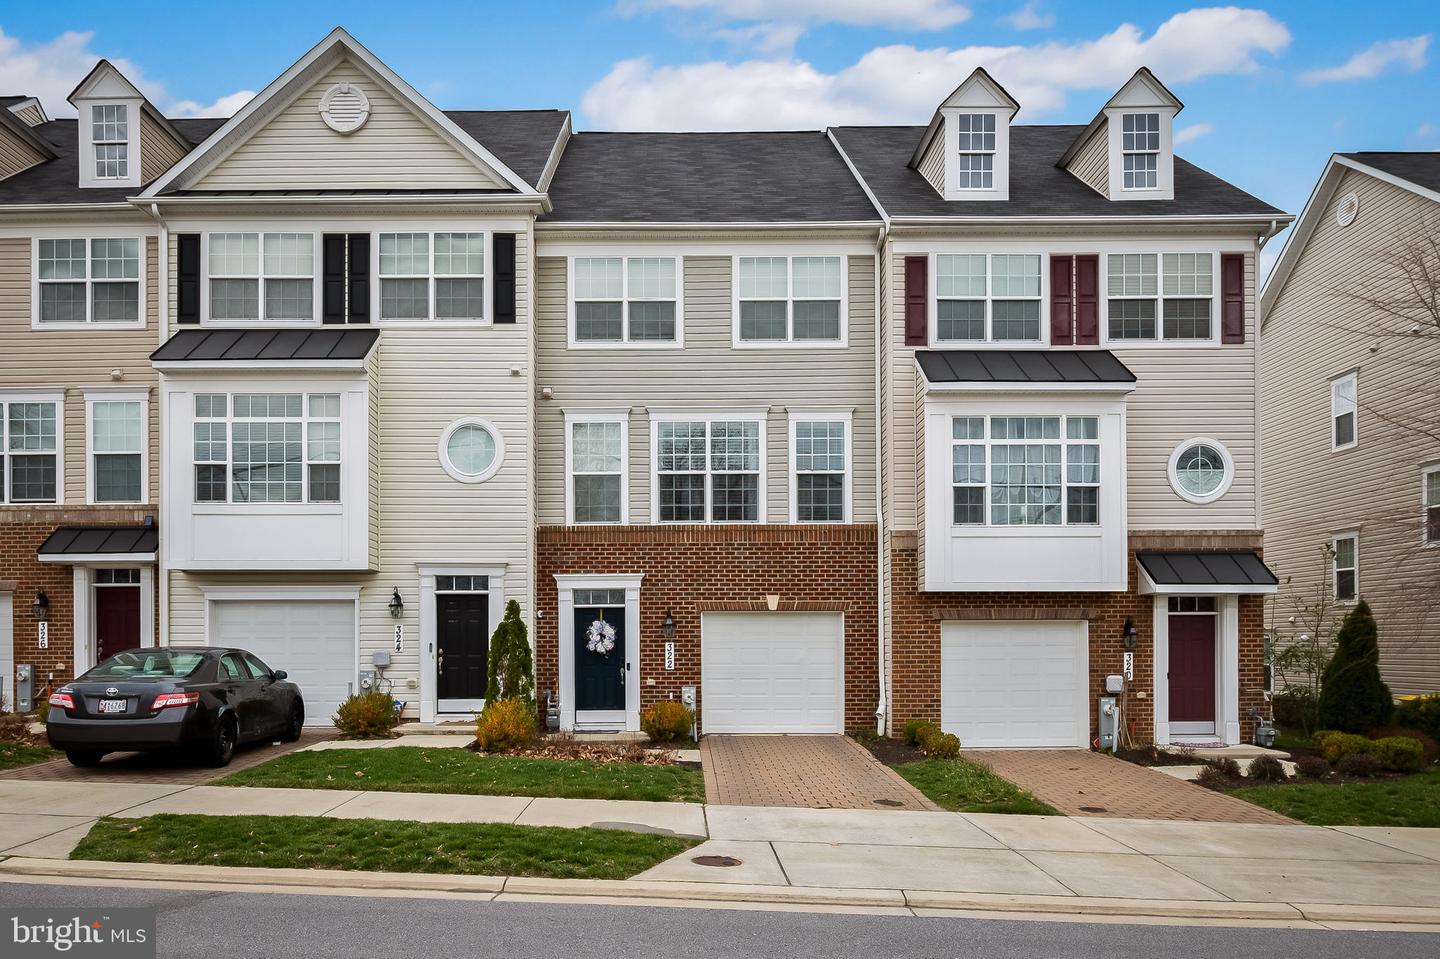 View Odenton, MD 21113 townhome